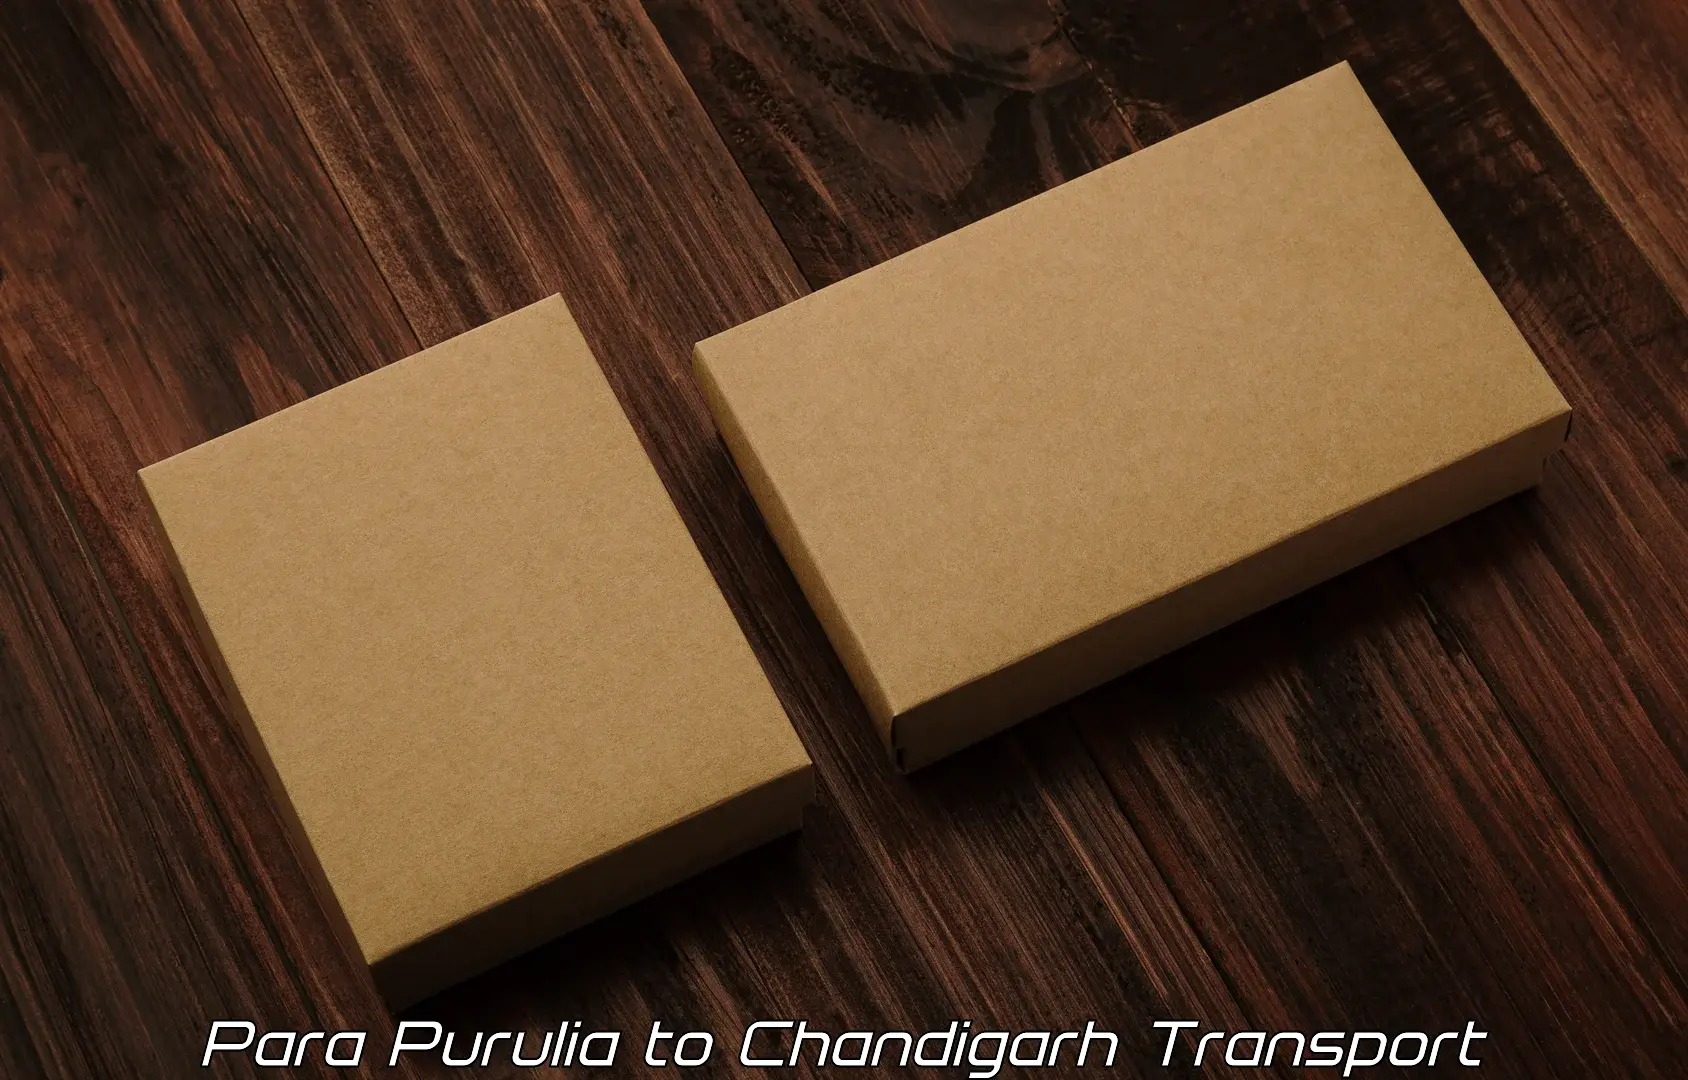 Container transportation services Para Purulia to Chandigarh